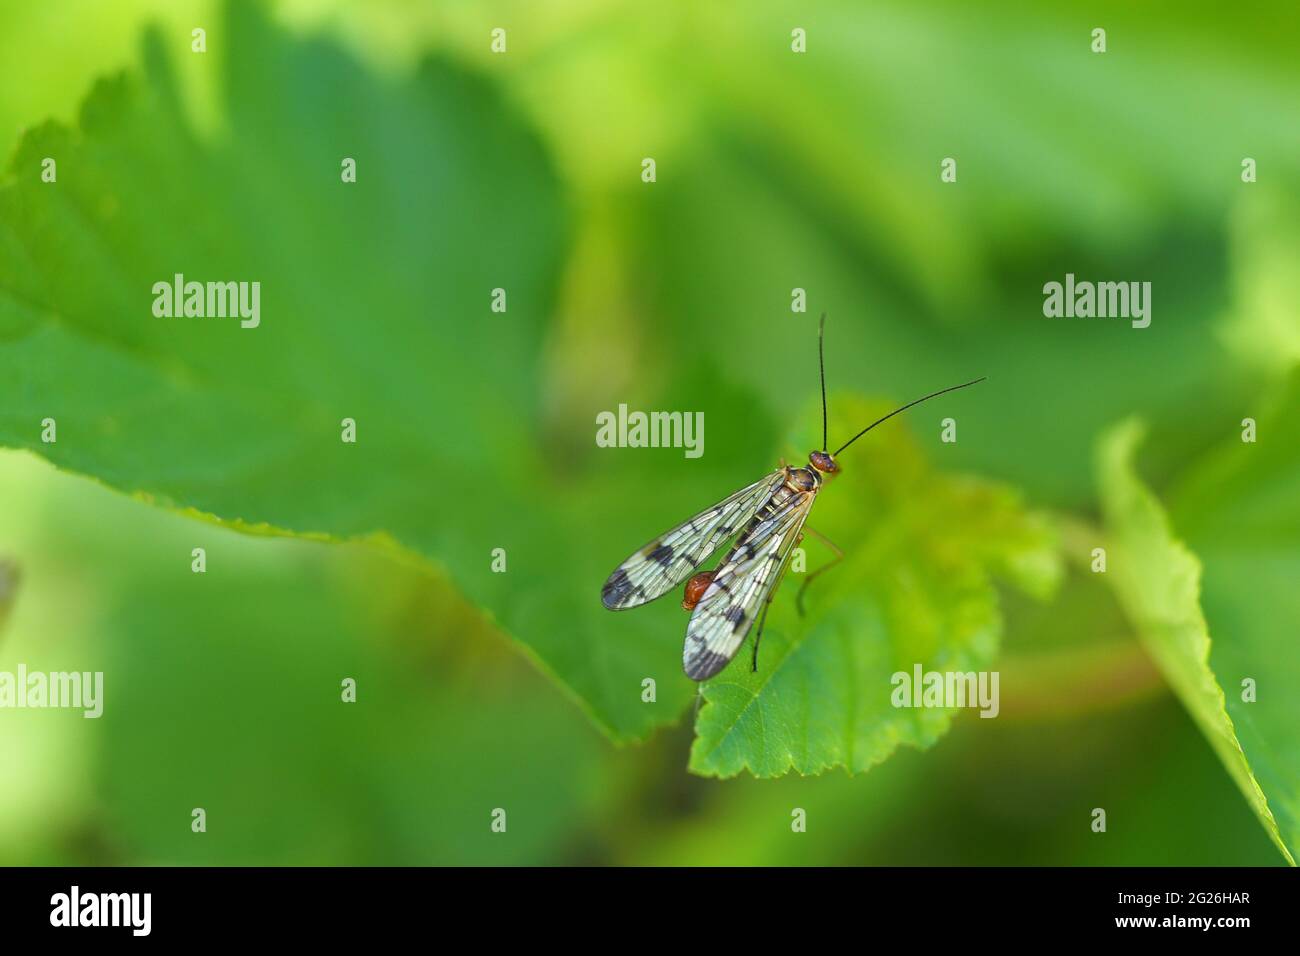 Macro shooting of insects in wildlife, blurred background. Stock Photo